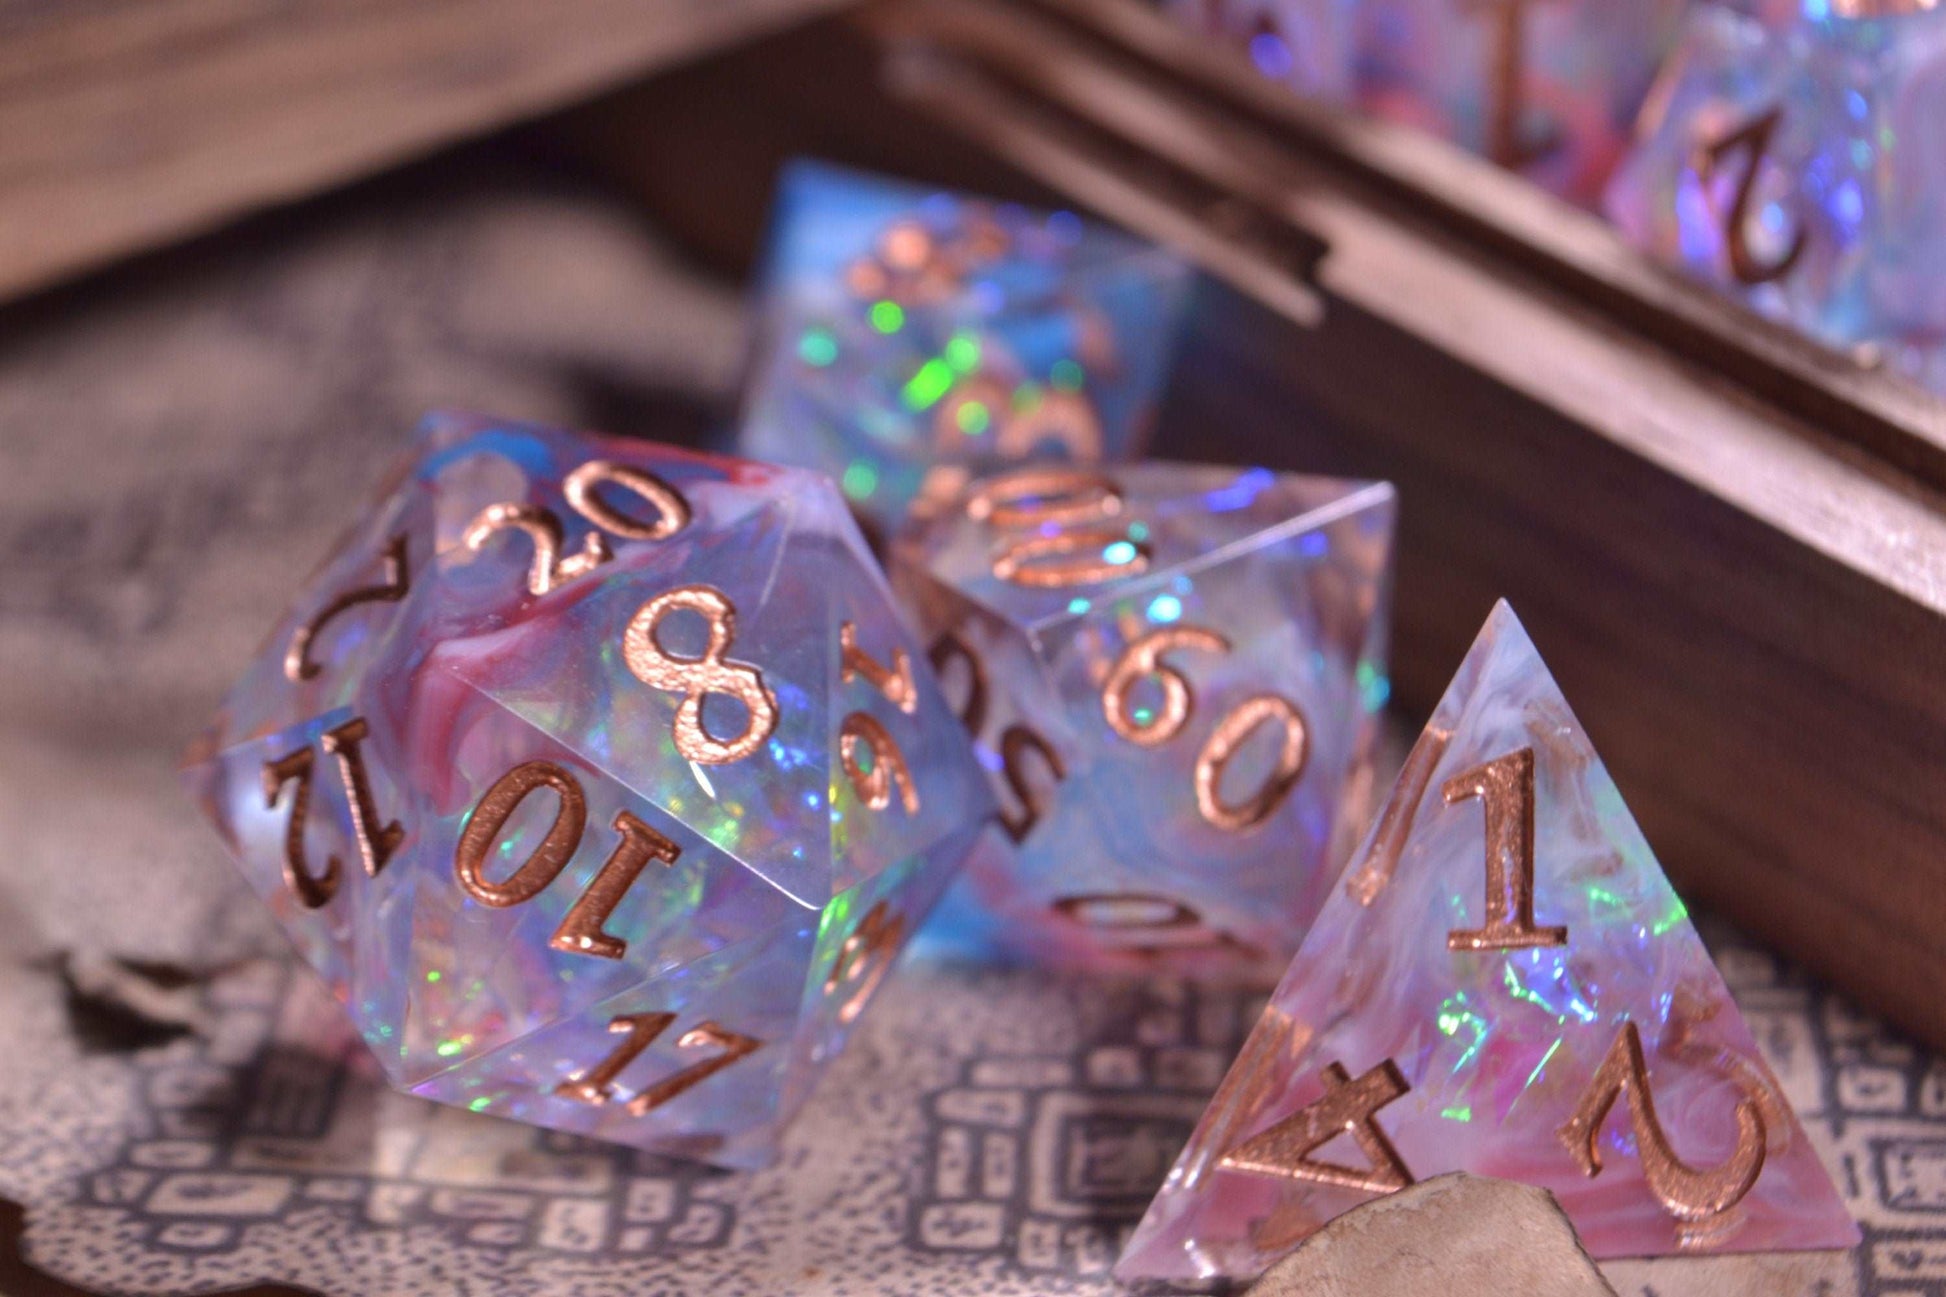 Sharp Edge DnD Pastel Dice Set -  Pastel Pink and Blue - Rose Gold Numbering - Dungeons and Dragons - Gift Set